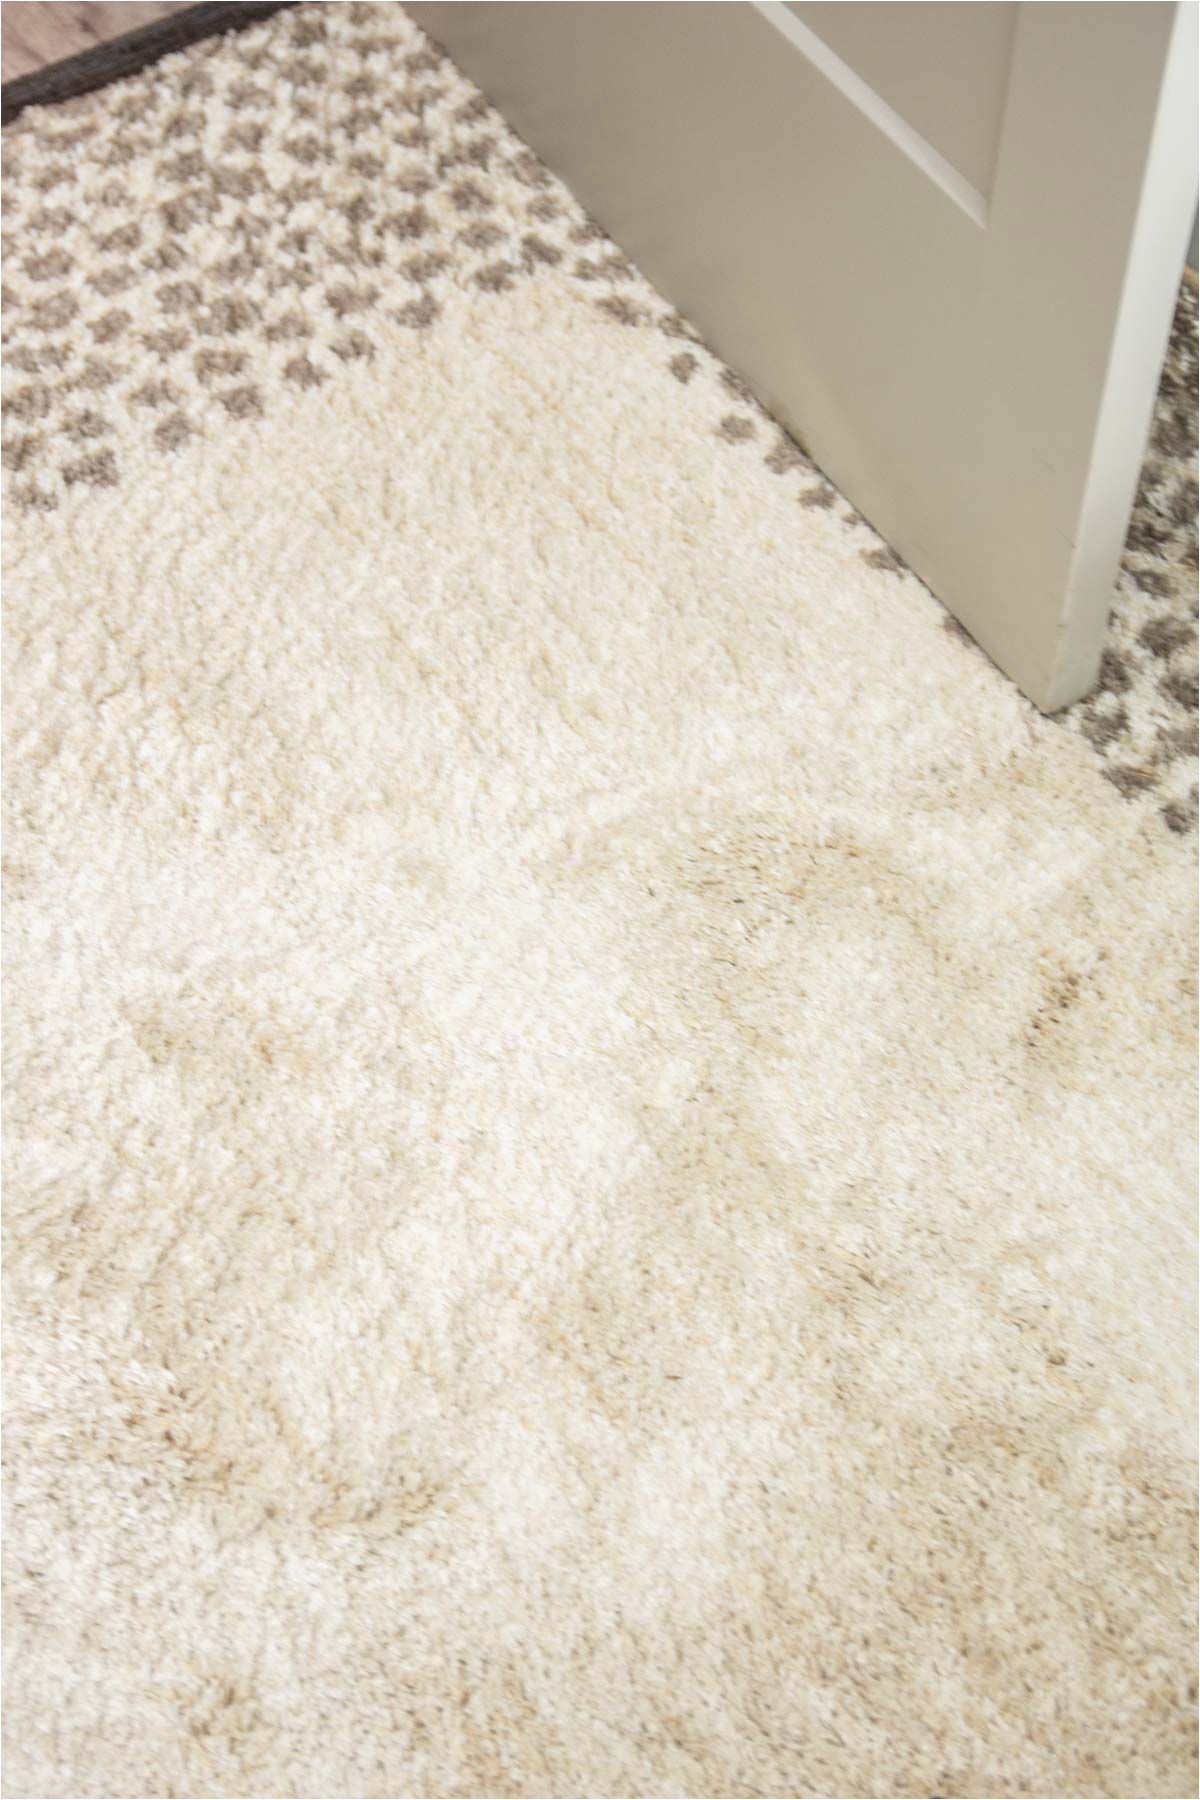 College Dorm Room area Rugs Cornell Apartment area Rugs for Each Bedroom